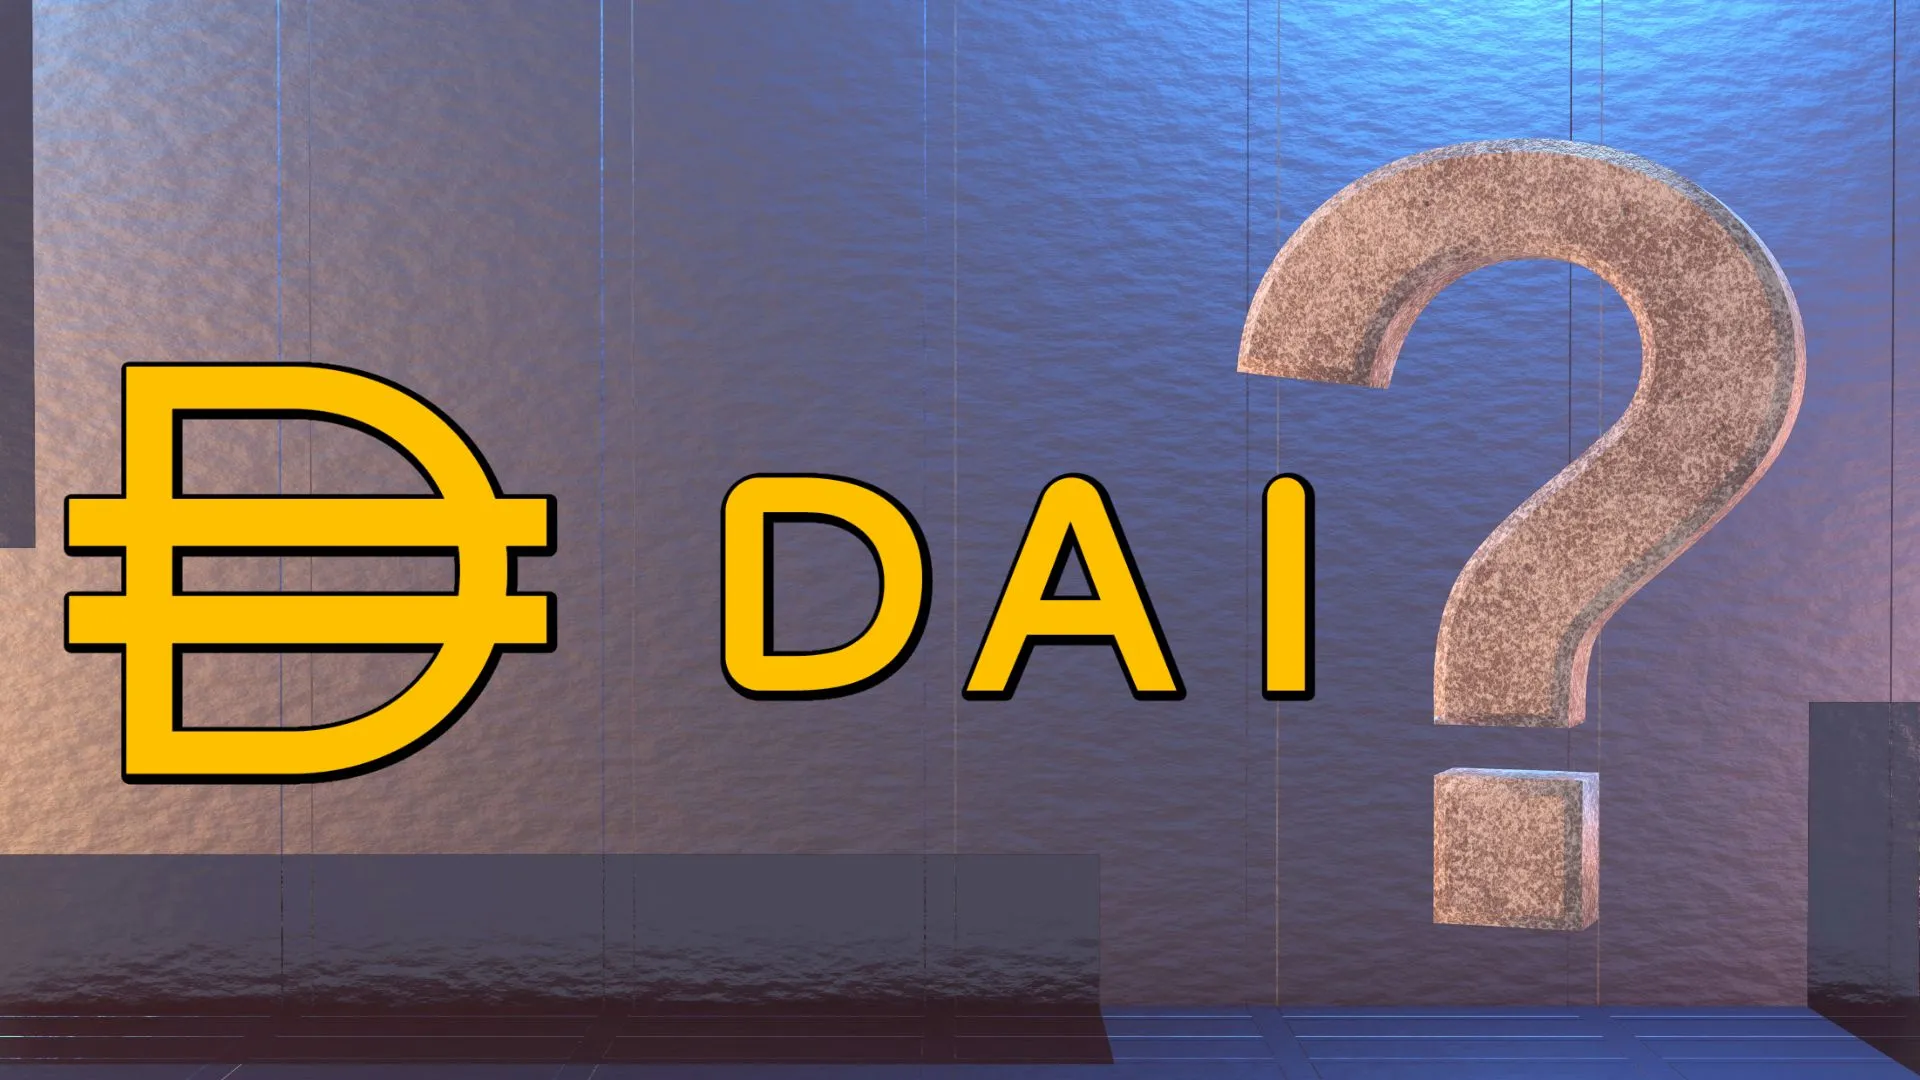 A Guide for New Users on How to Make Use of the DAI Stablecoin